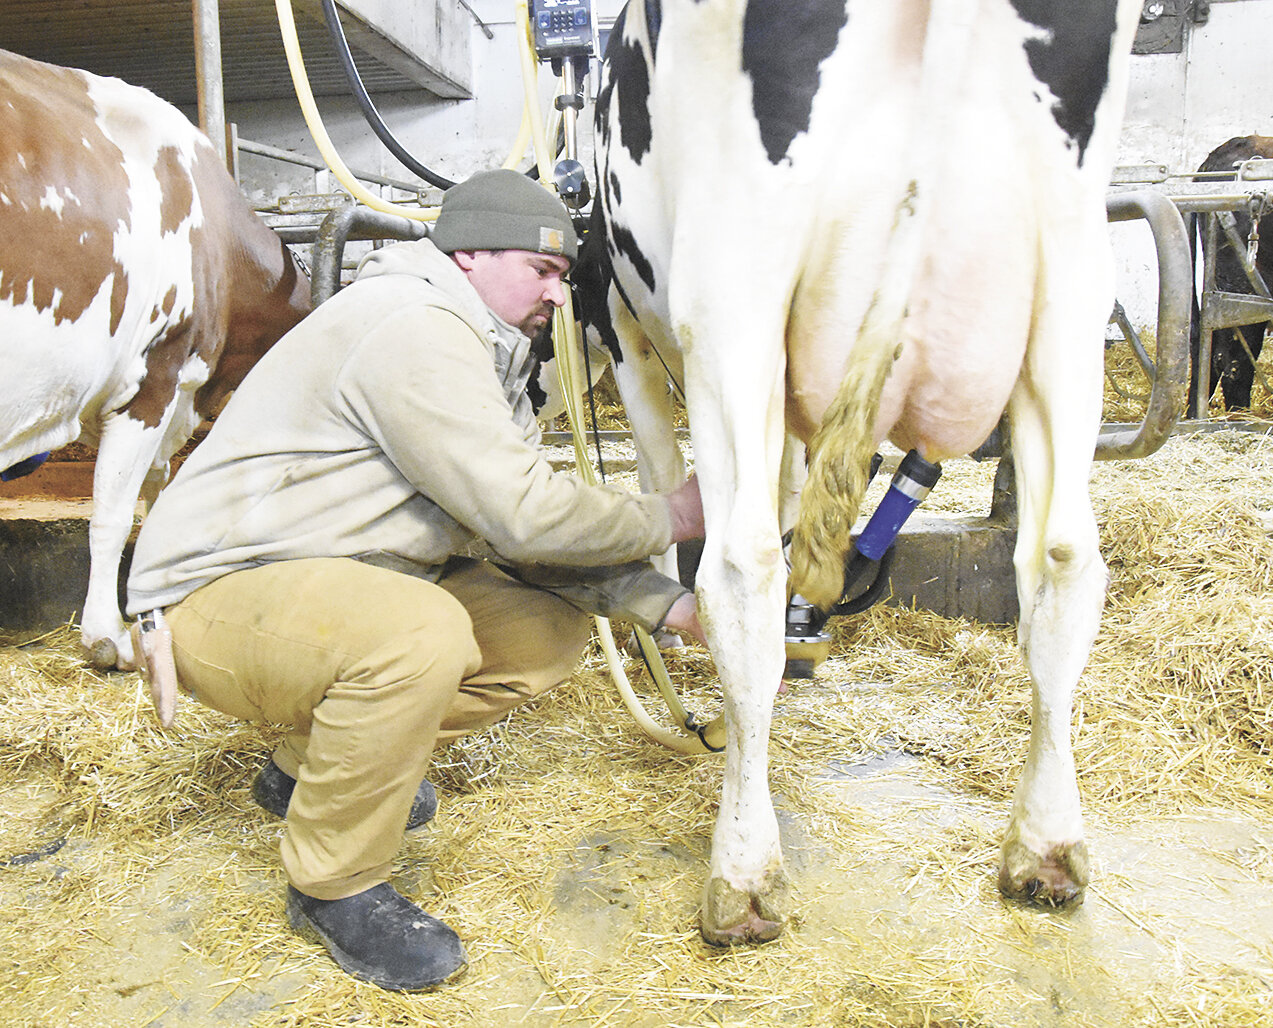 Nick Hemmesch attaches a milking unit Jan. 23 on the farm he operates with his parents near Lake Henry, Minnesota. Hemmesch has been a volunteer firefighter with the Lake Henry Fire Department for 10 years.